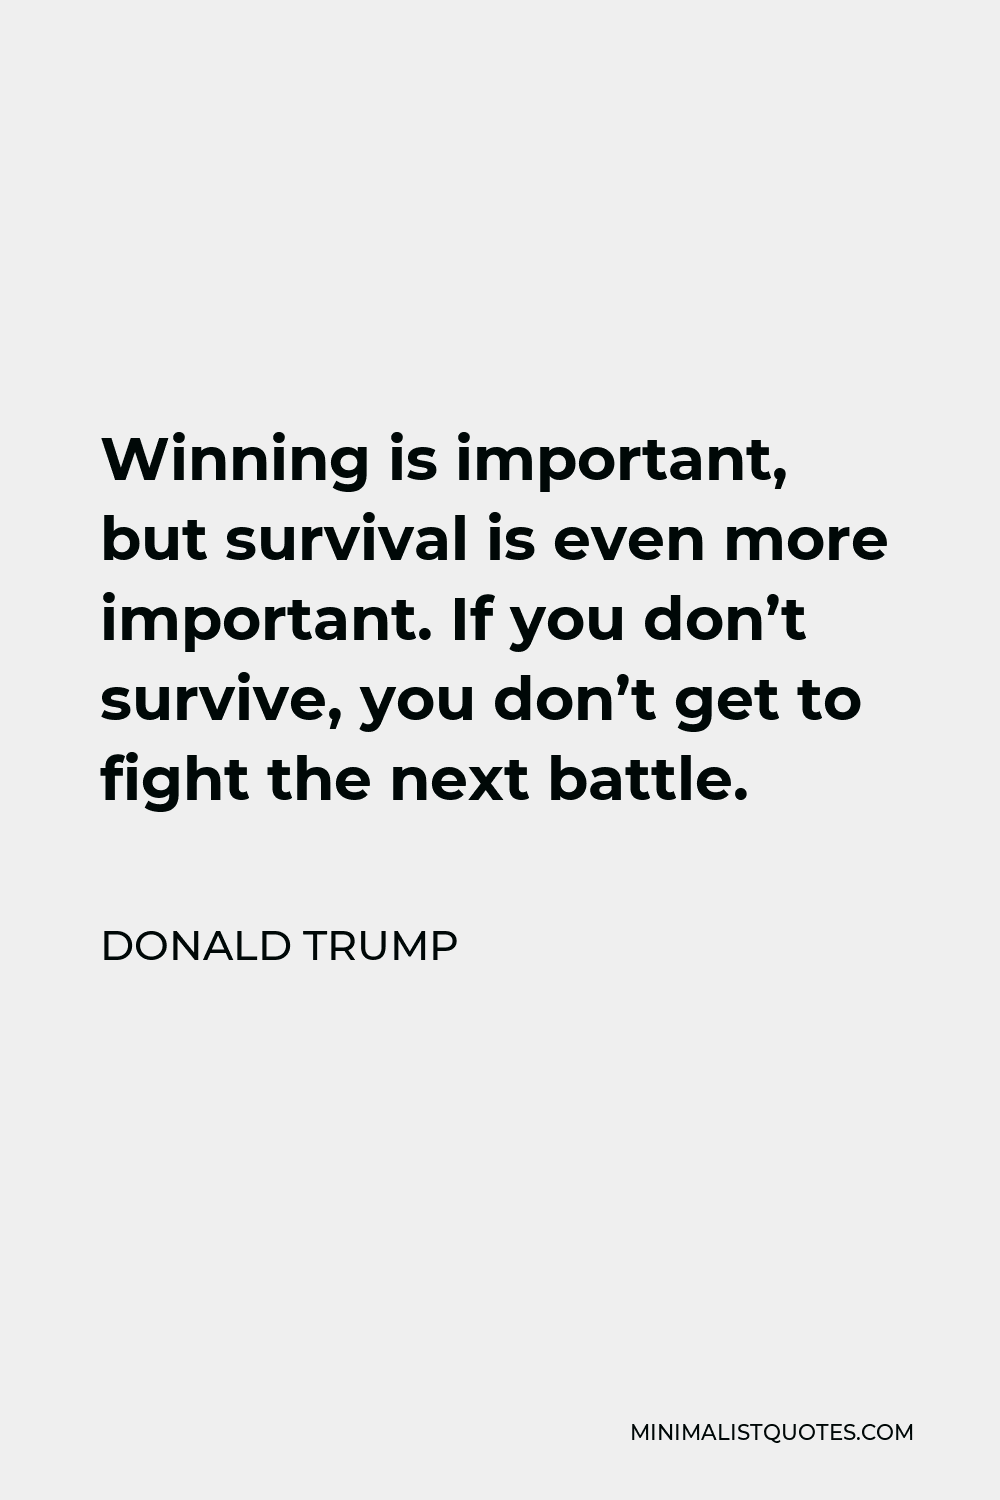 Donald Trump Quote - Winning is important, but survival is even more important. If you don’t survive, you don’t get to fight the next battle.